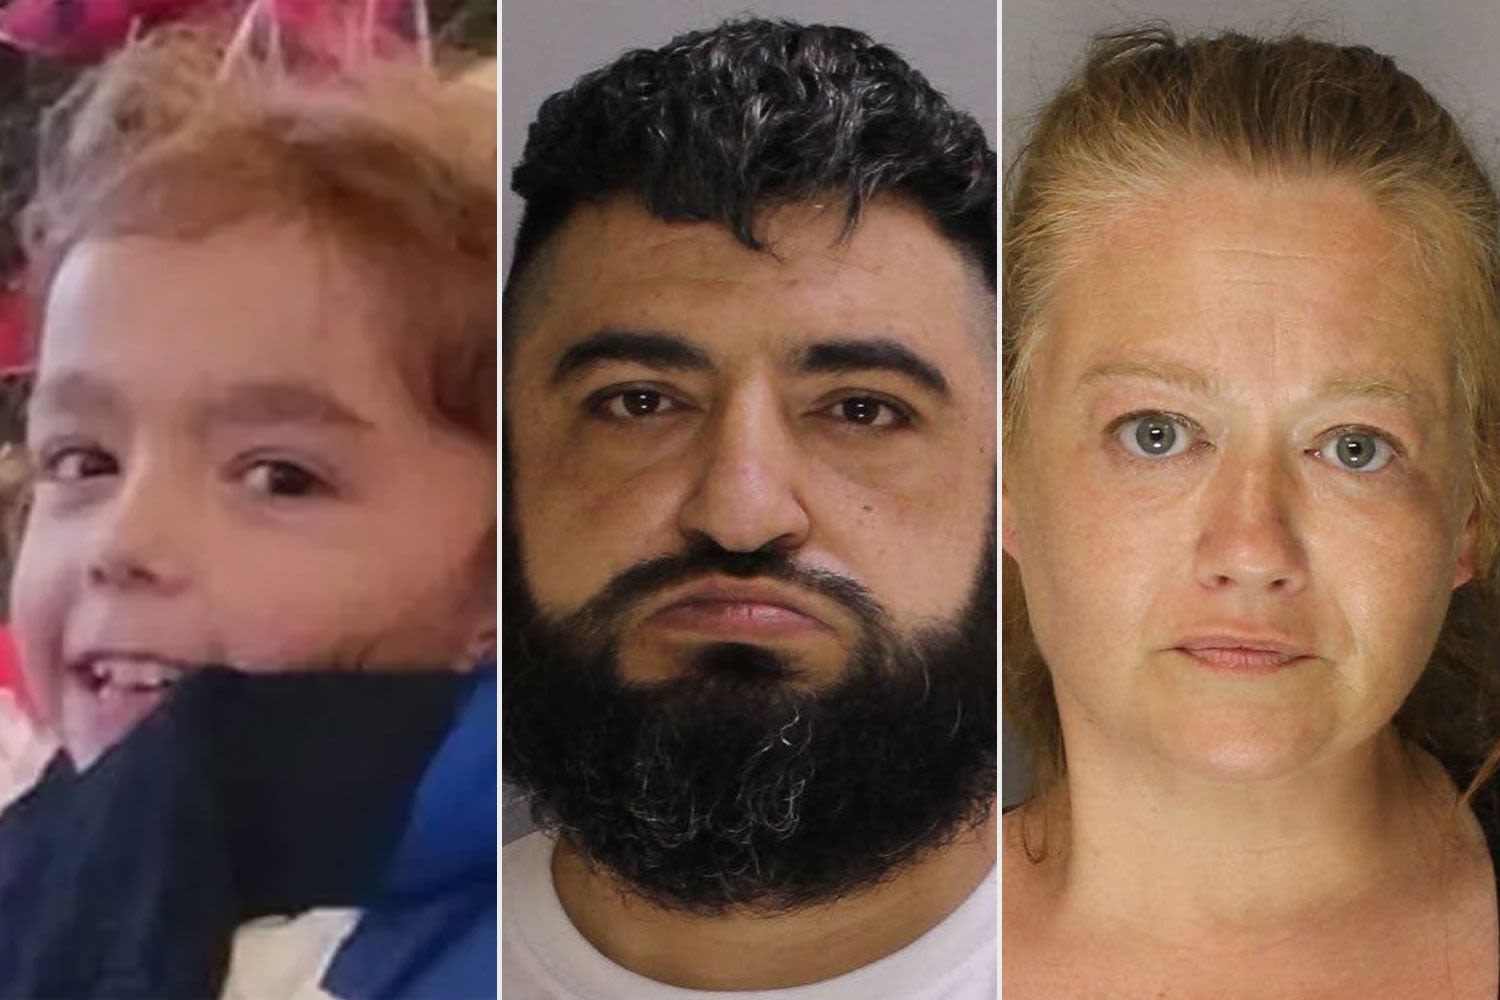 8-Year-Old Boy Who Died Last July Had Cocaine and Fentanyl in System. Now His Parents Are Charged with Murder